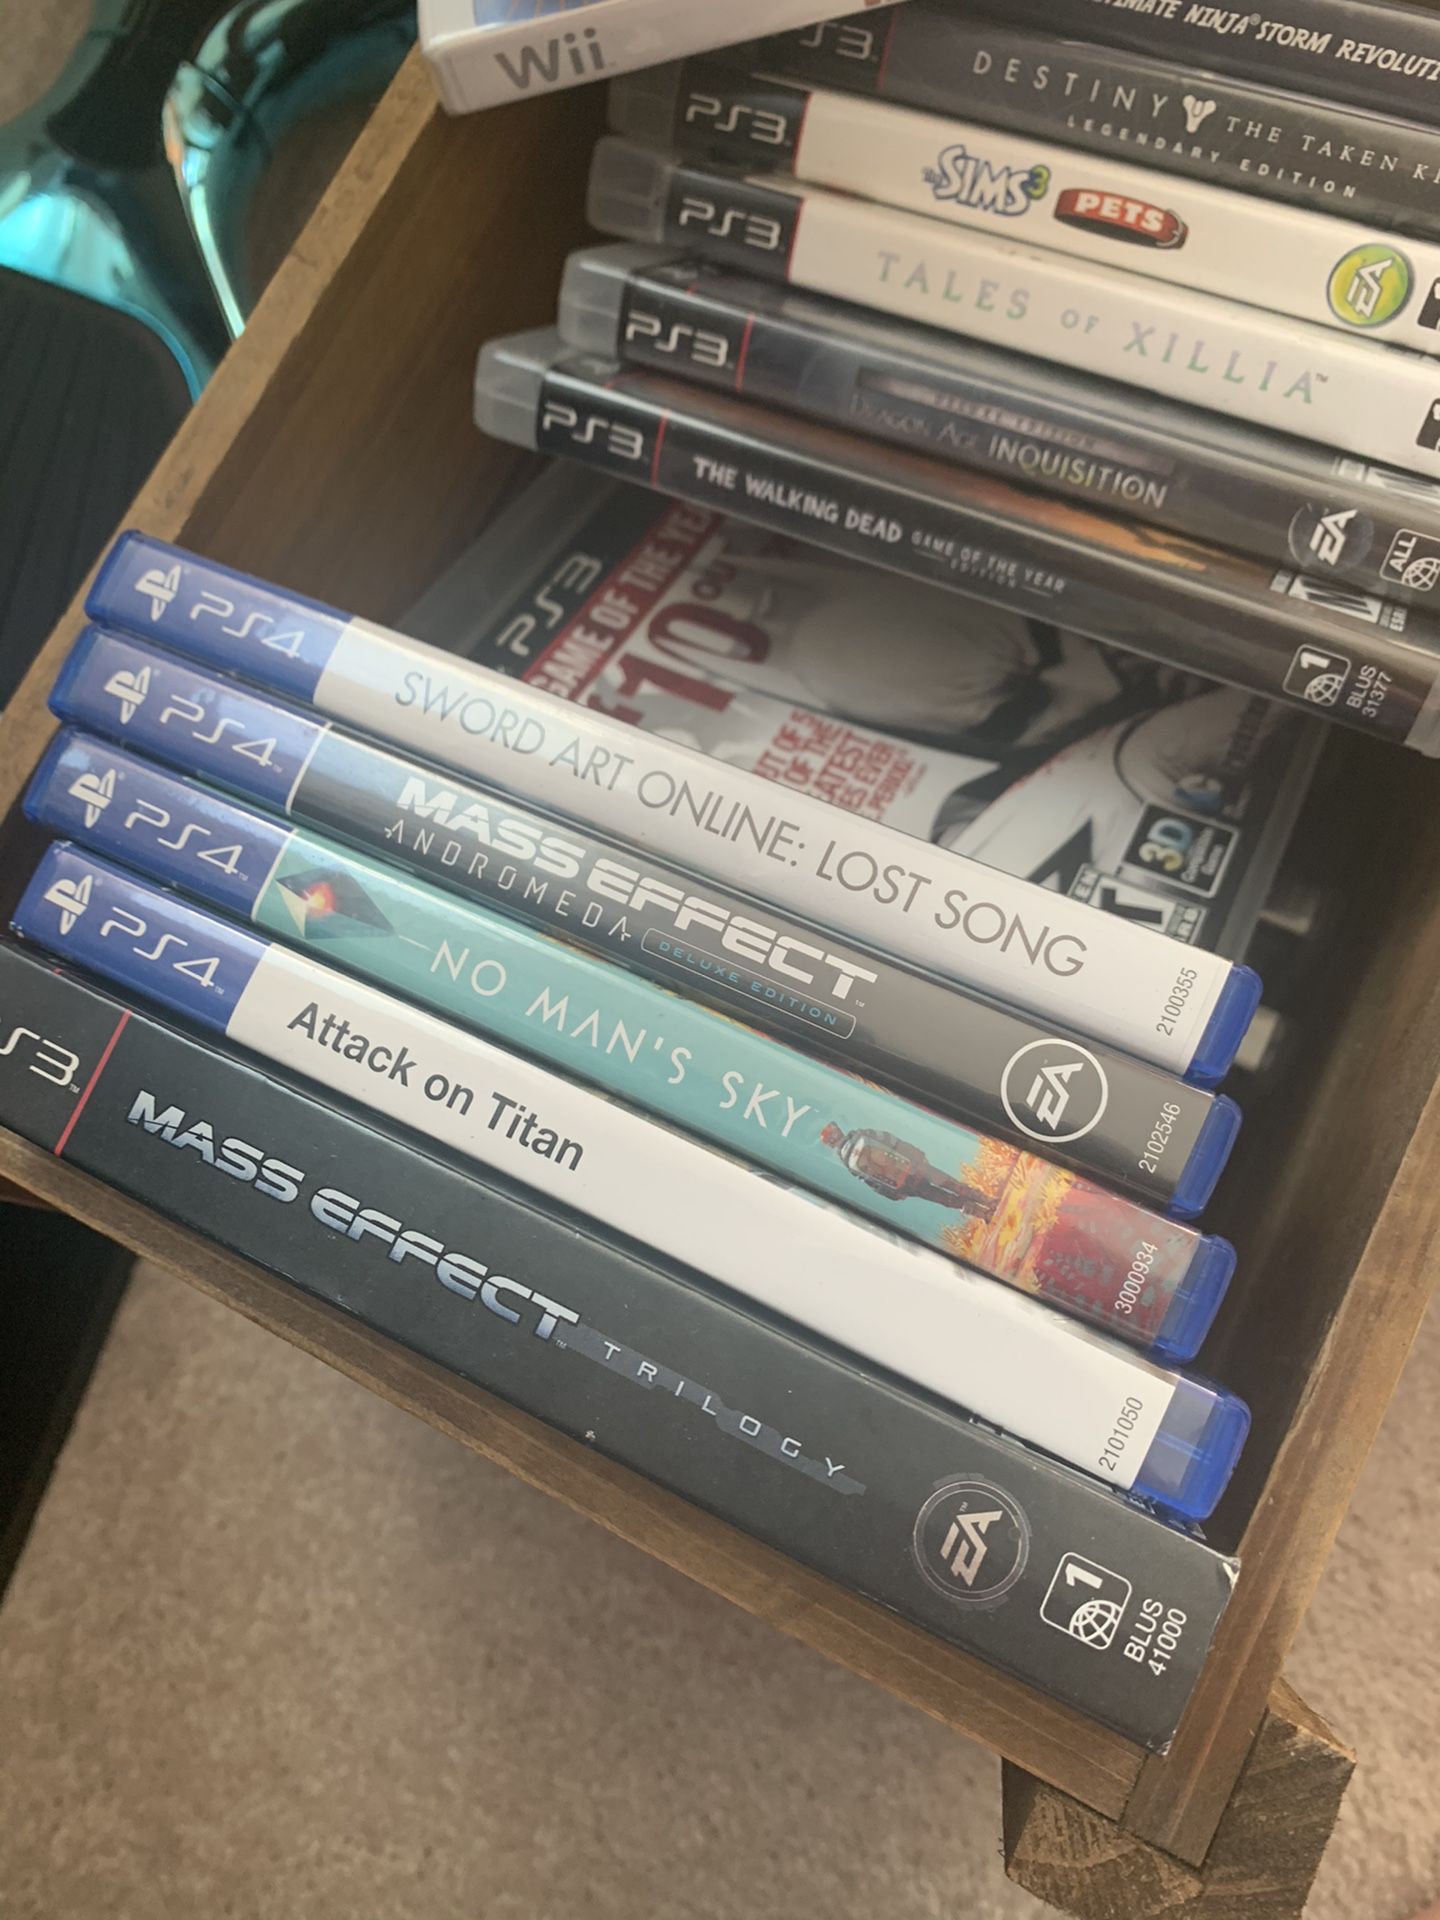 Ps3 and Ps4 games